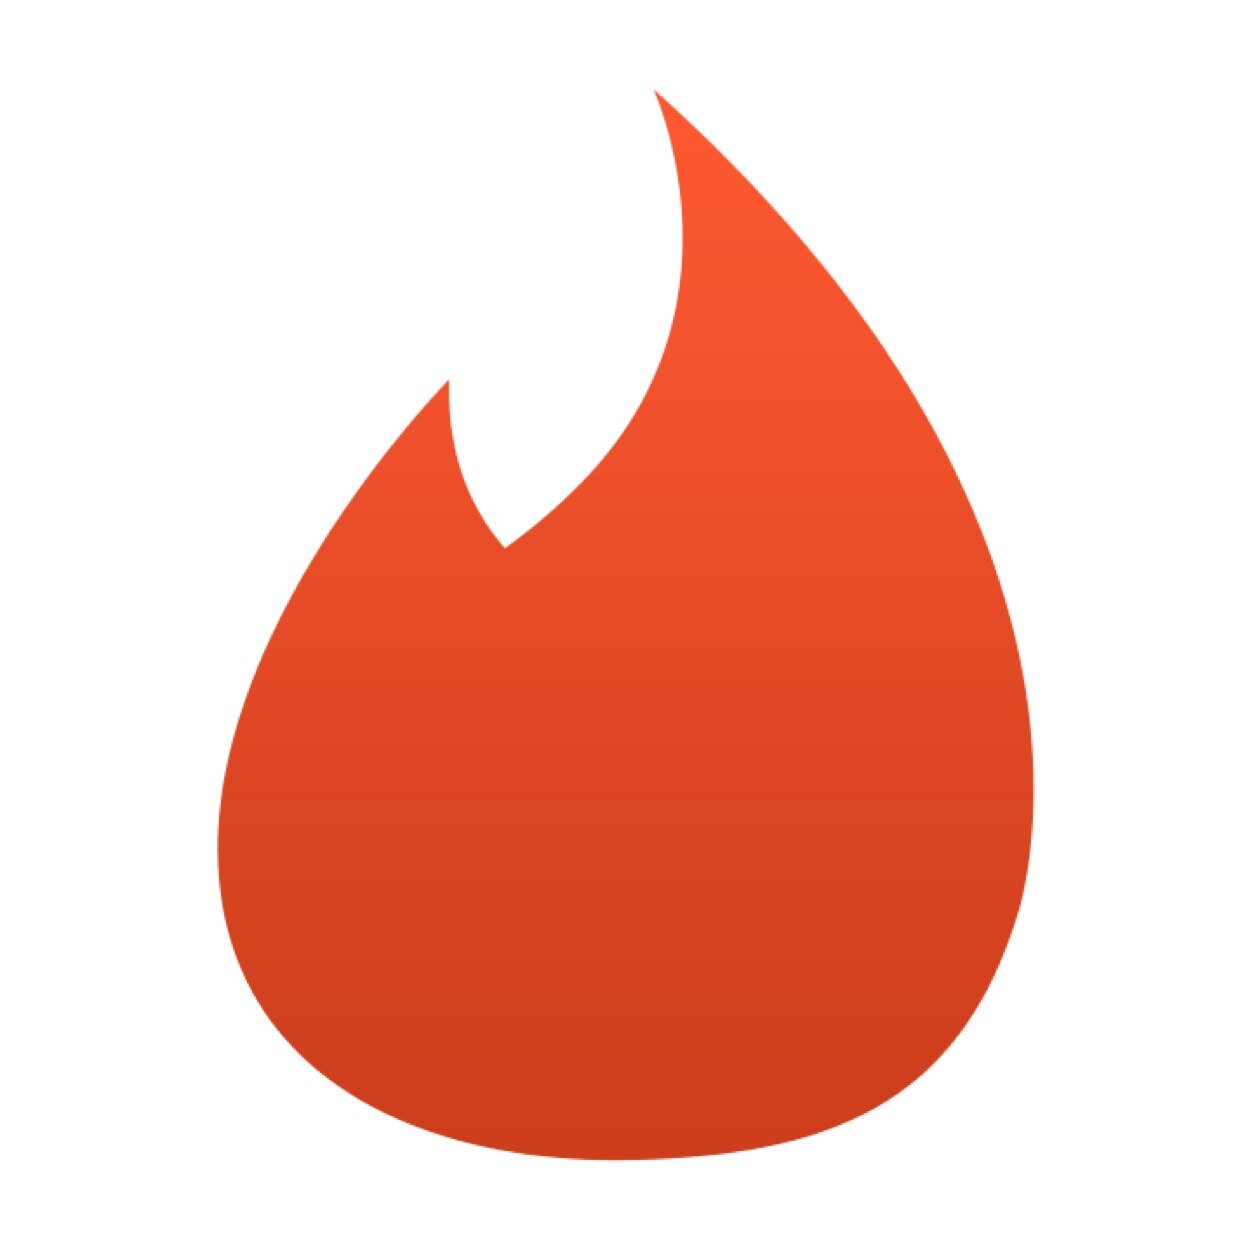 Tinder faces class action lawsuit over $2.99 monthly fee